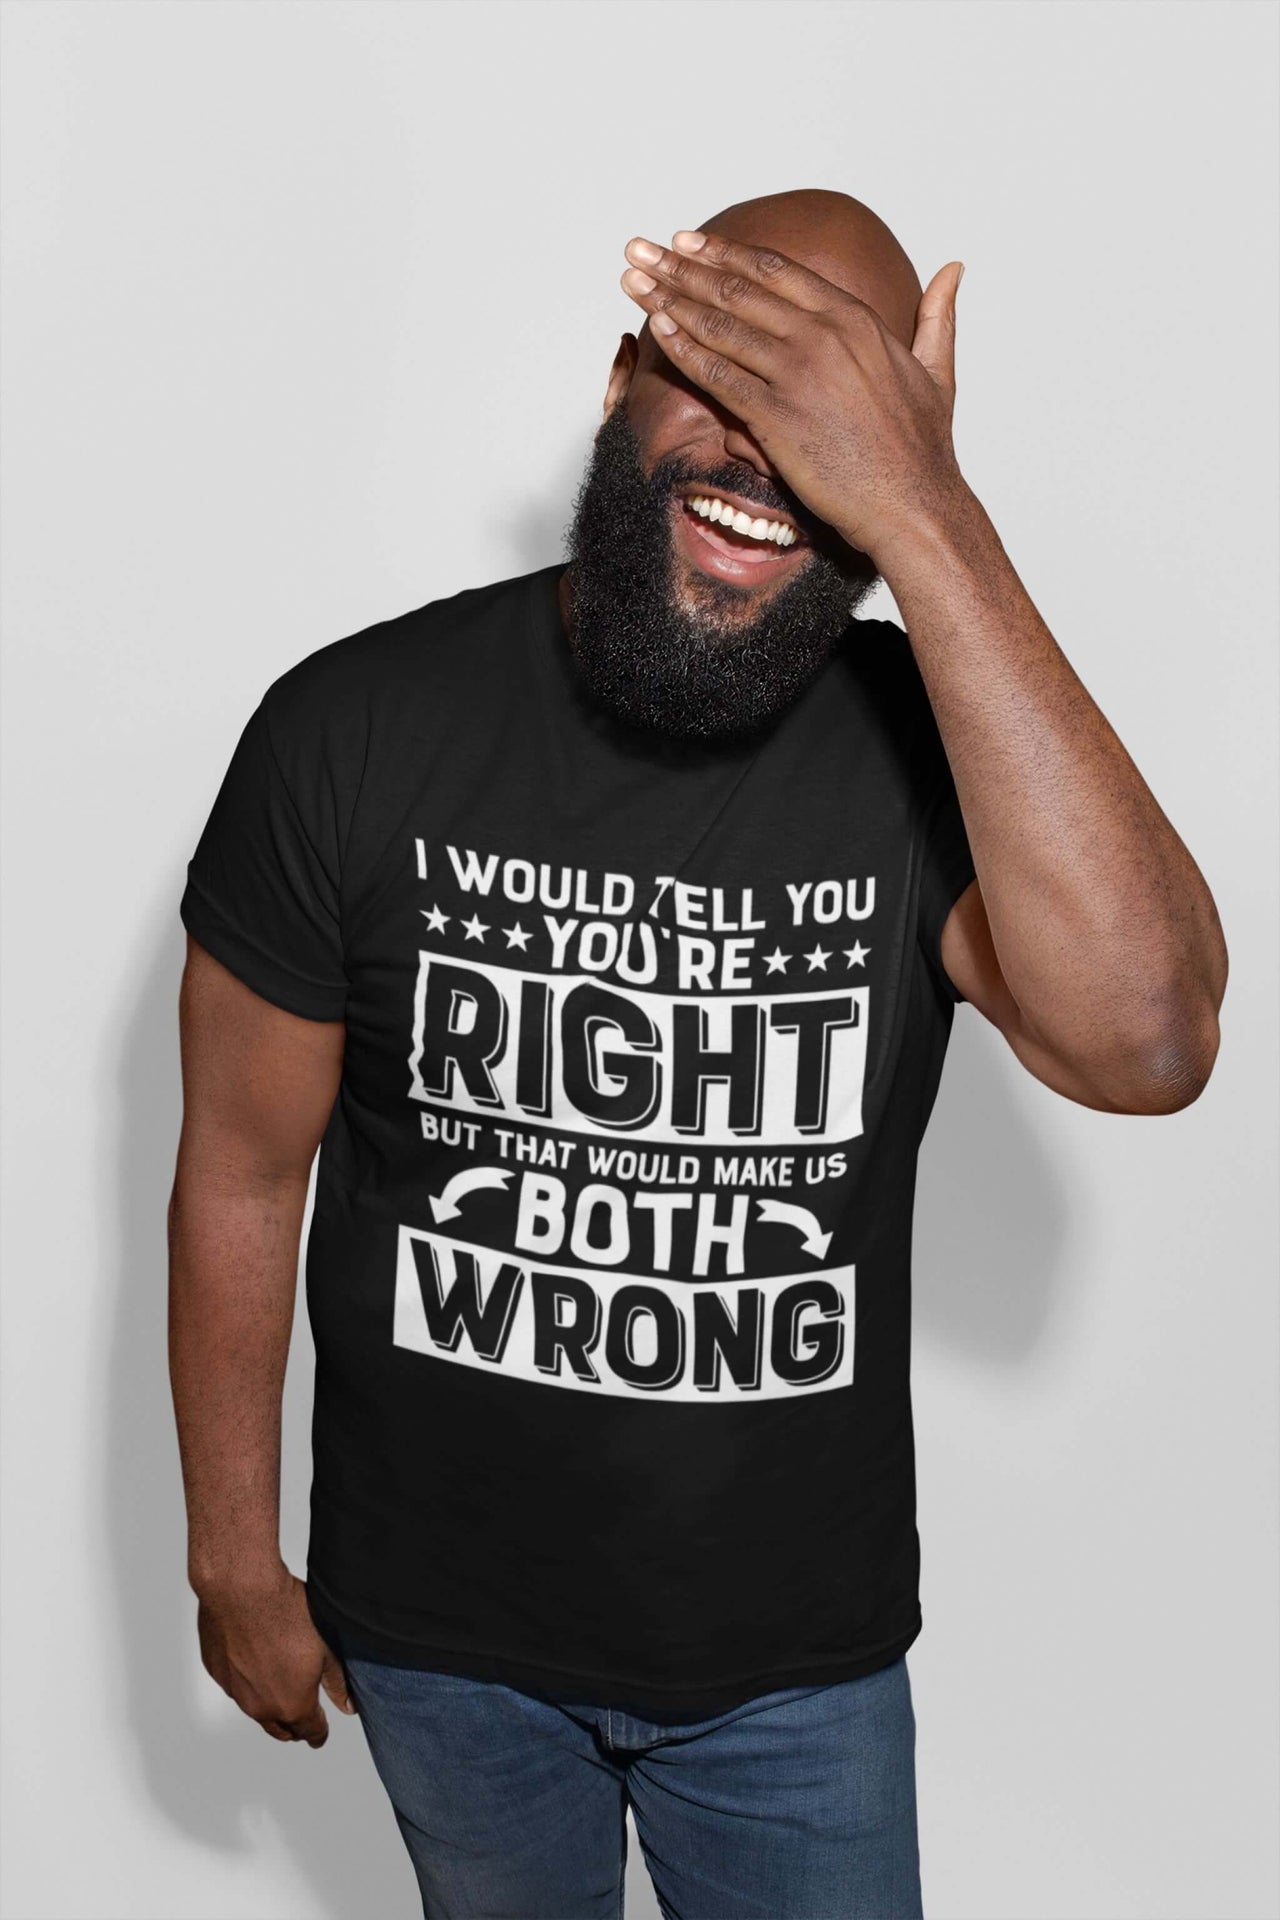 I Would Tell You Your Right, But That Would Make Us Both Wrong - Sarcastic Unisex T-Shirt | Abanak